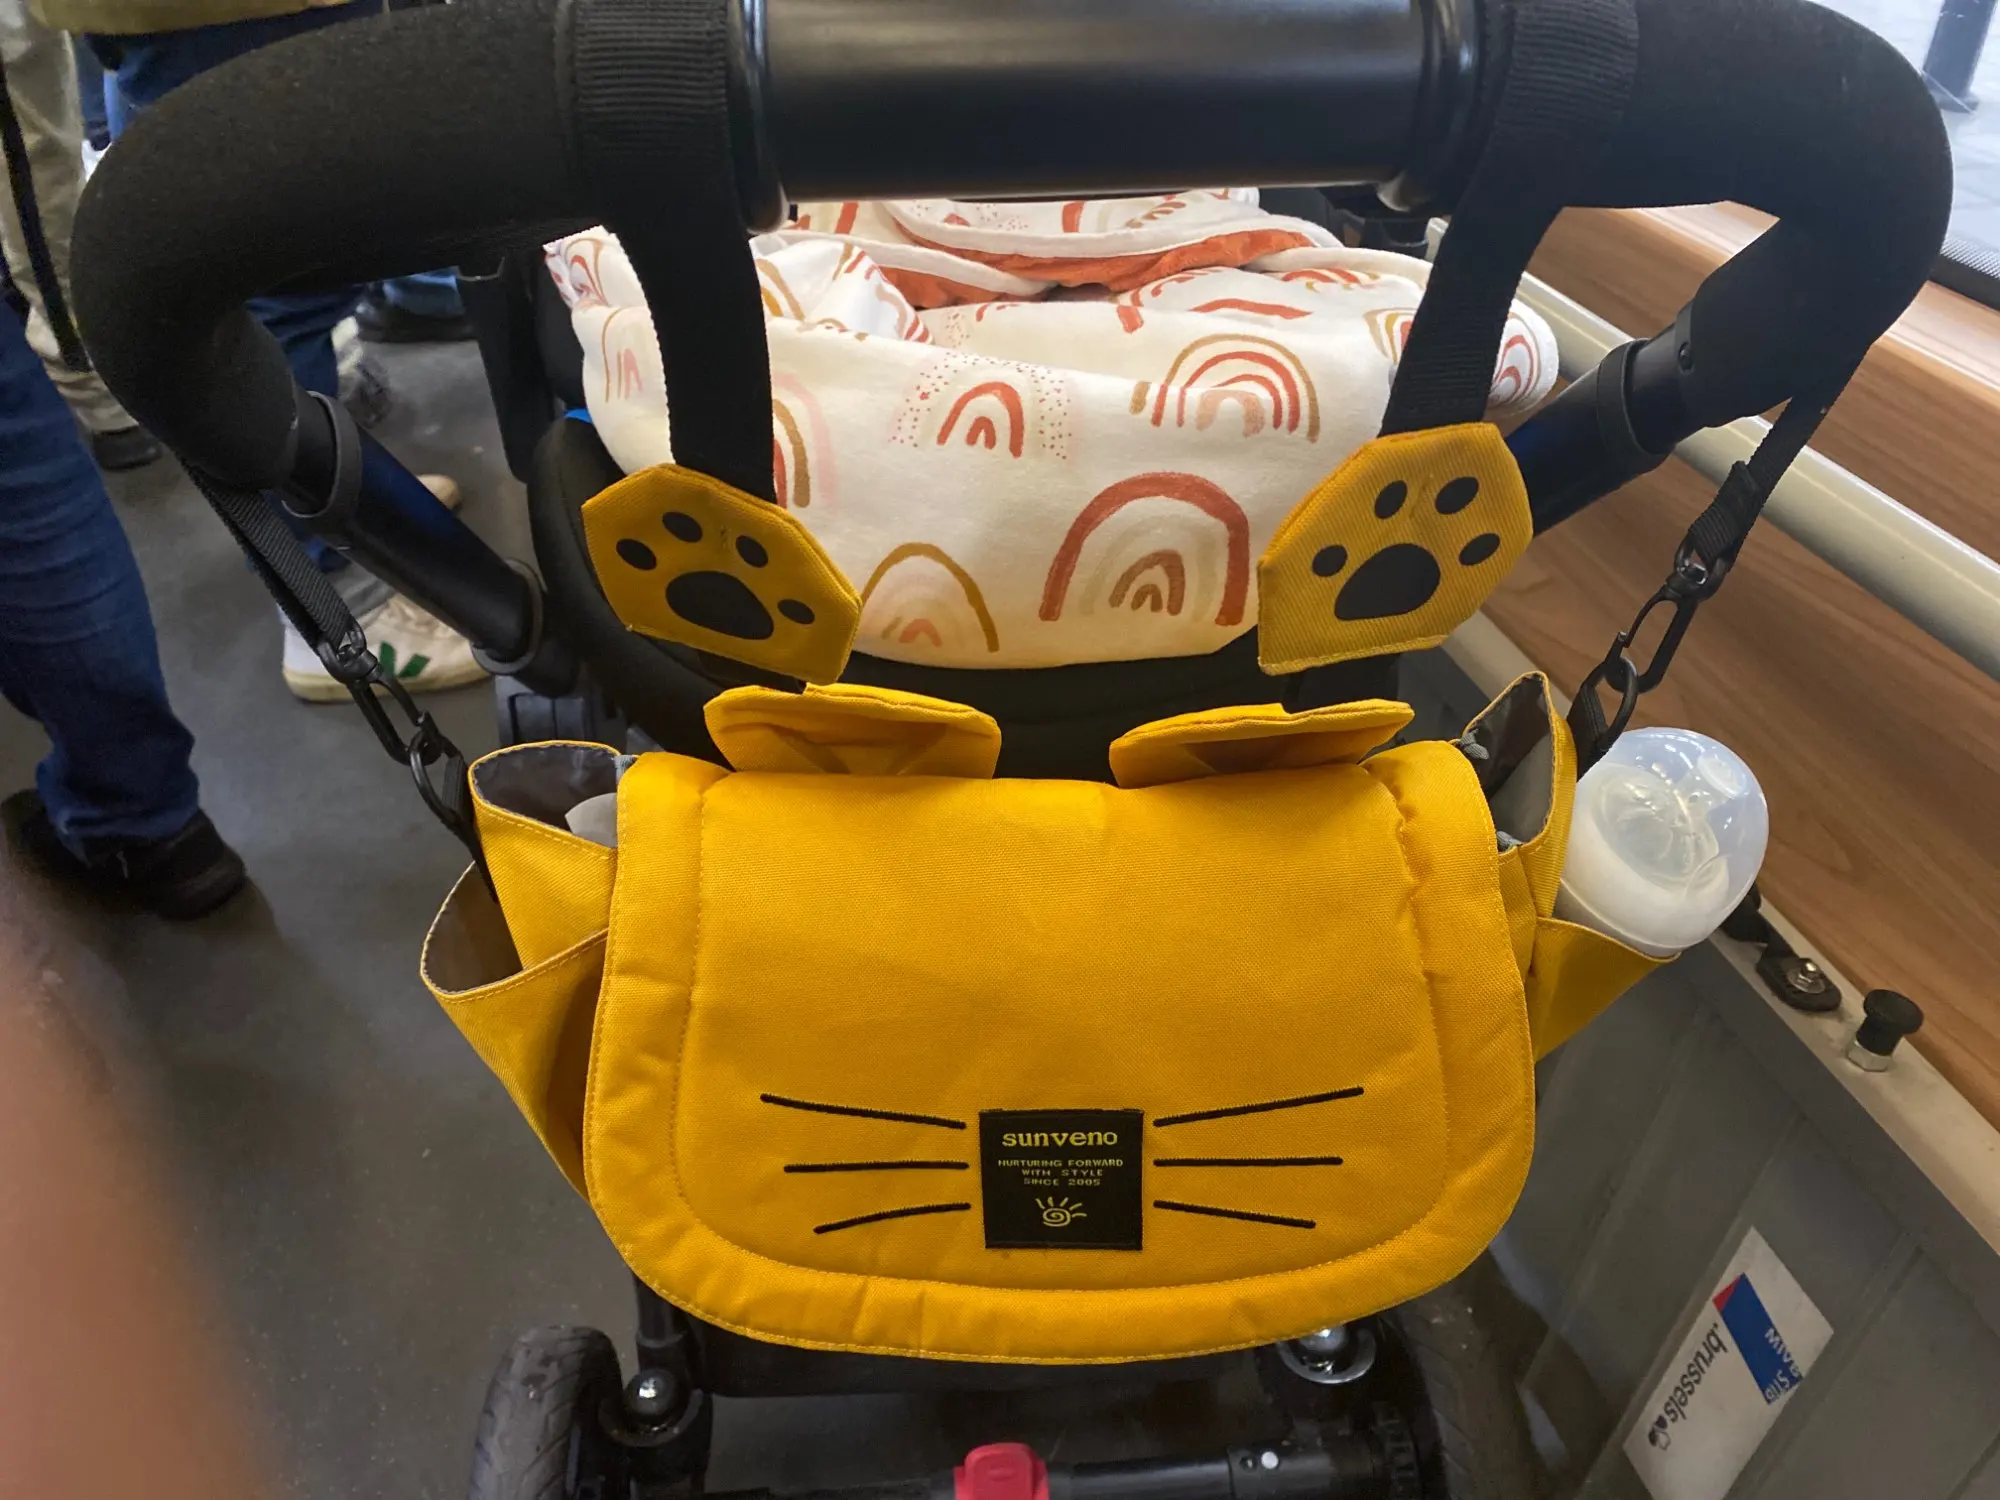 Meow-tain Large Capacity Cat Diaper Bag for Stylish and Organized Travels - Mom Essentials - Black or Yellow photo review